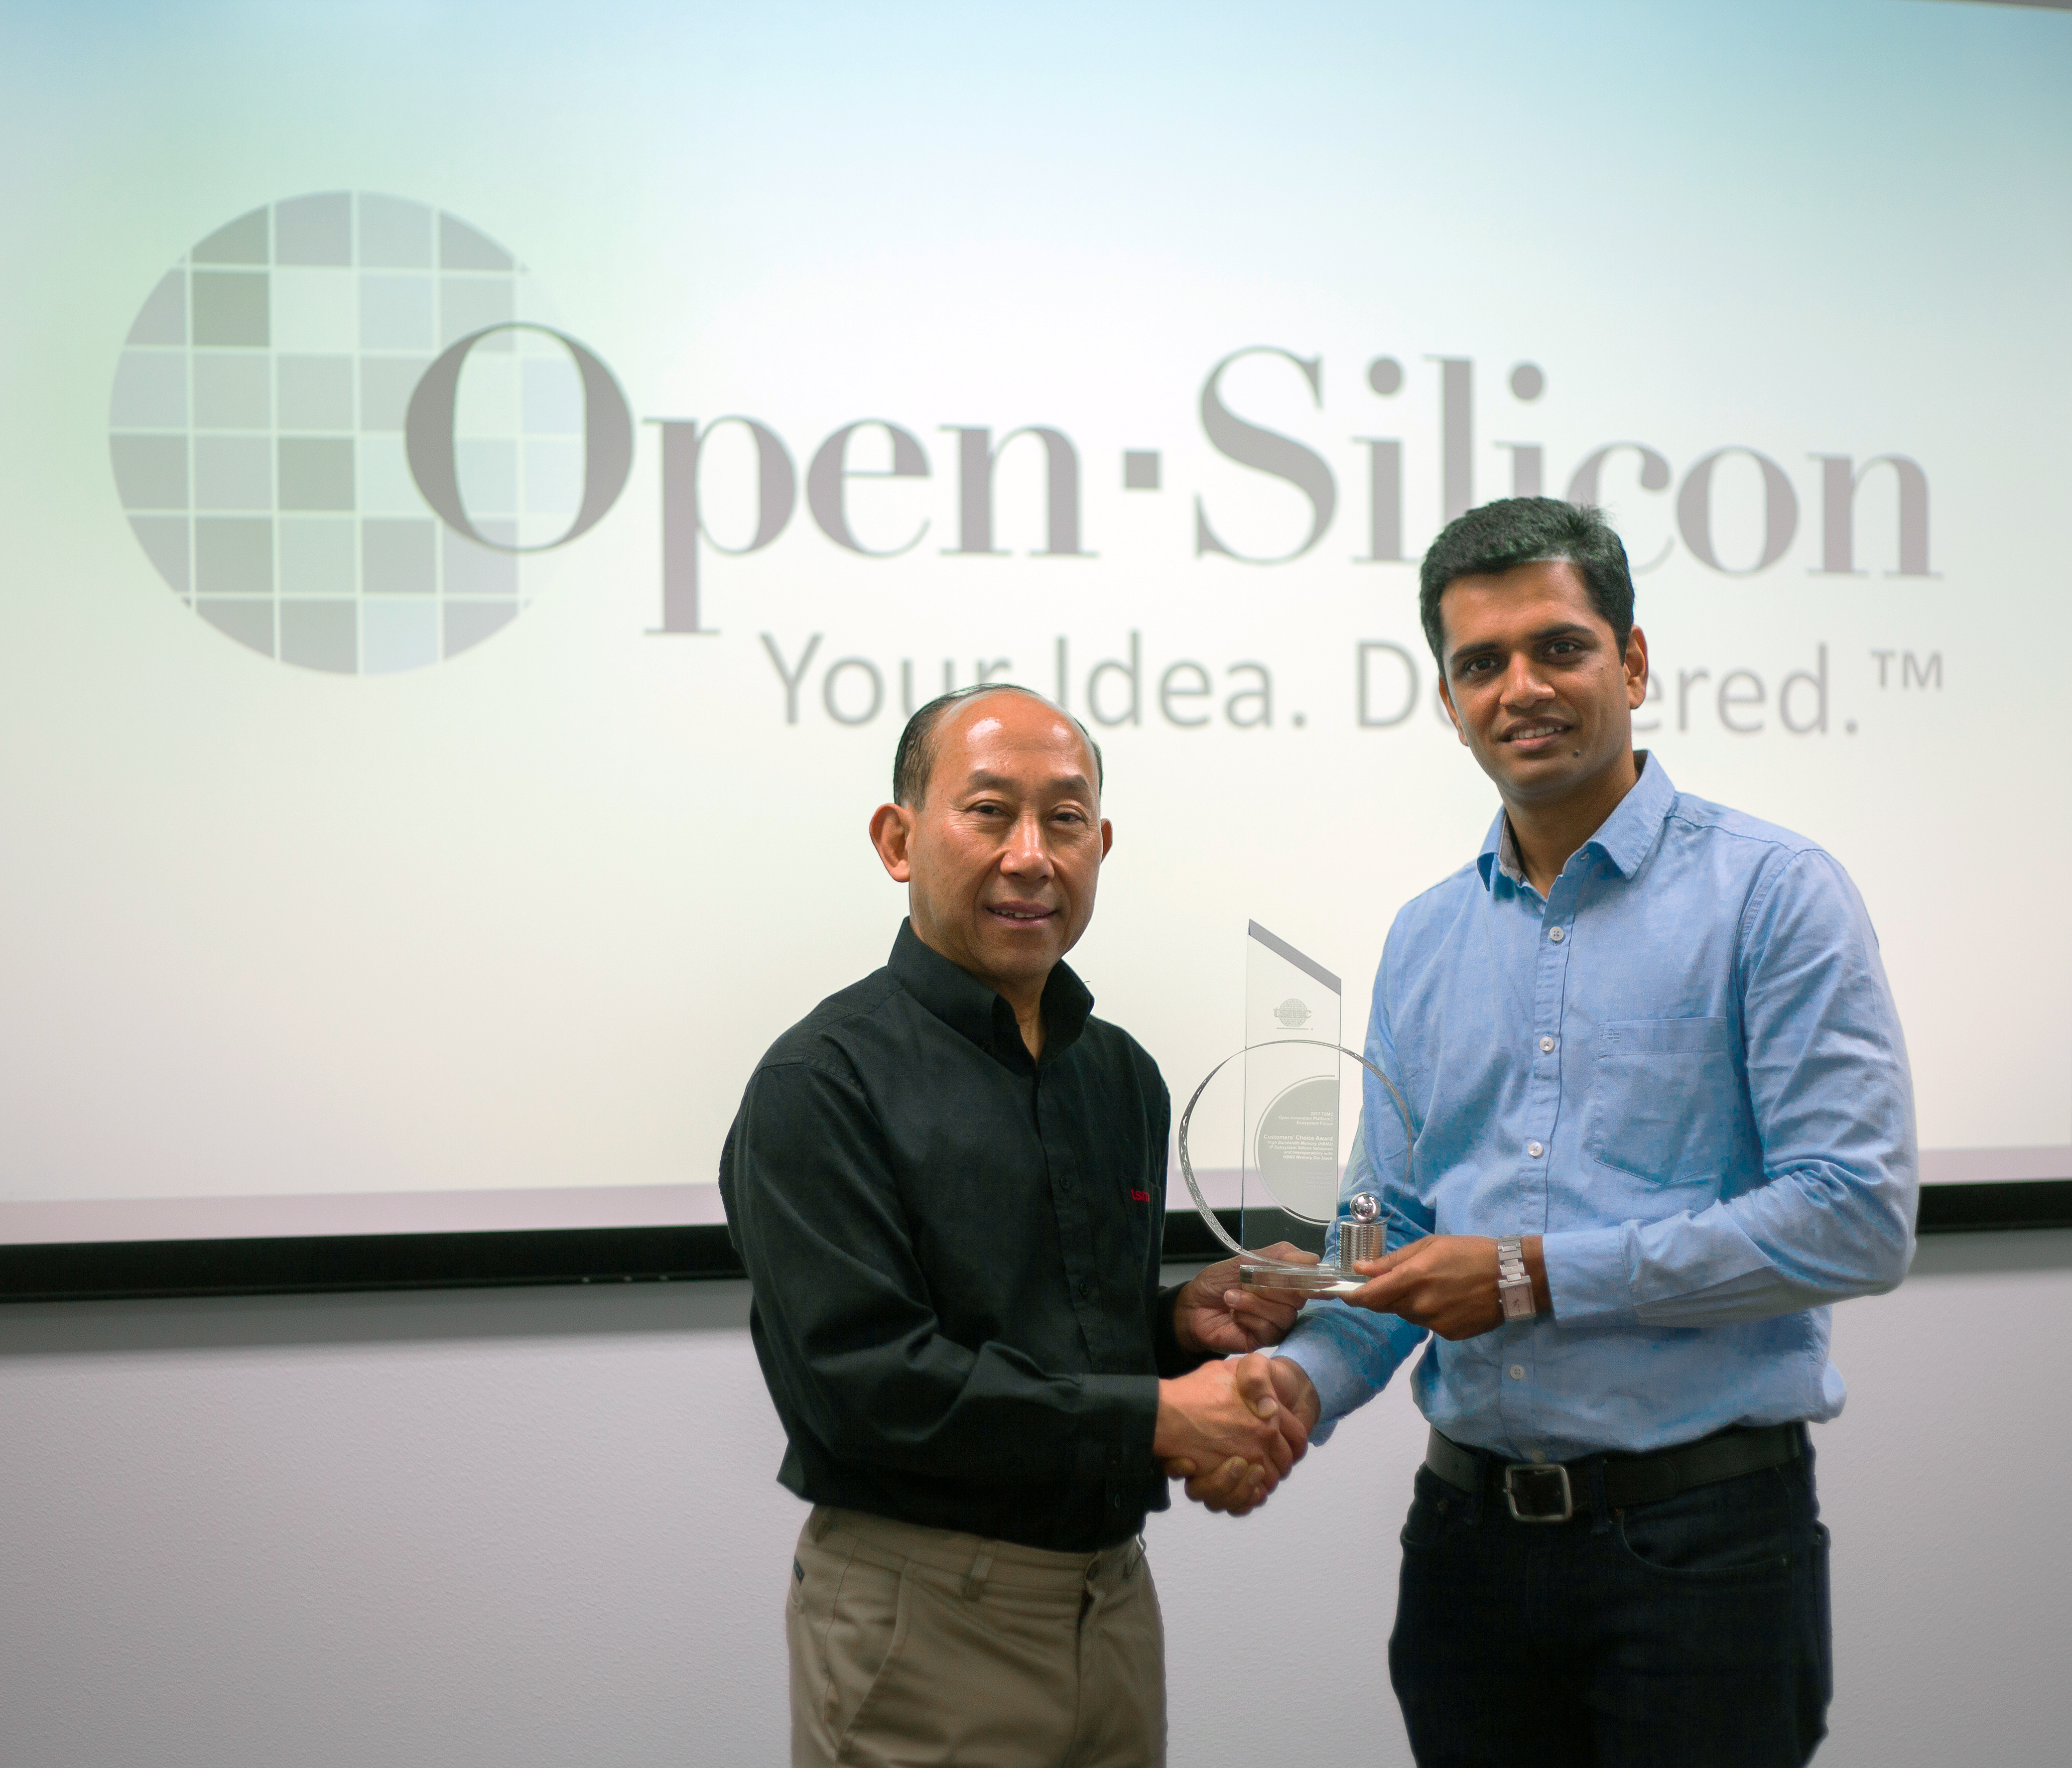 TSMC OIP Ecosystem Forum Customers’ Choice Award for Best Paper